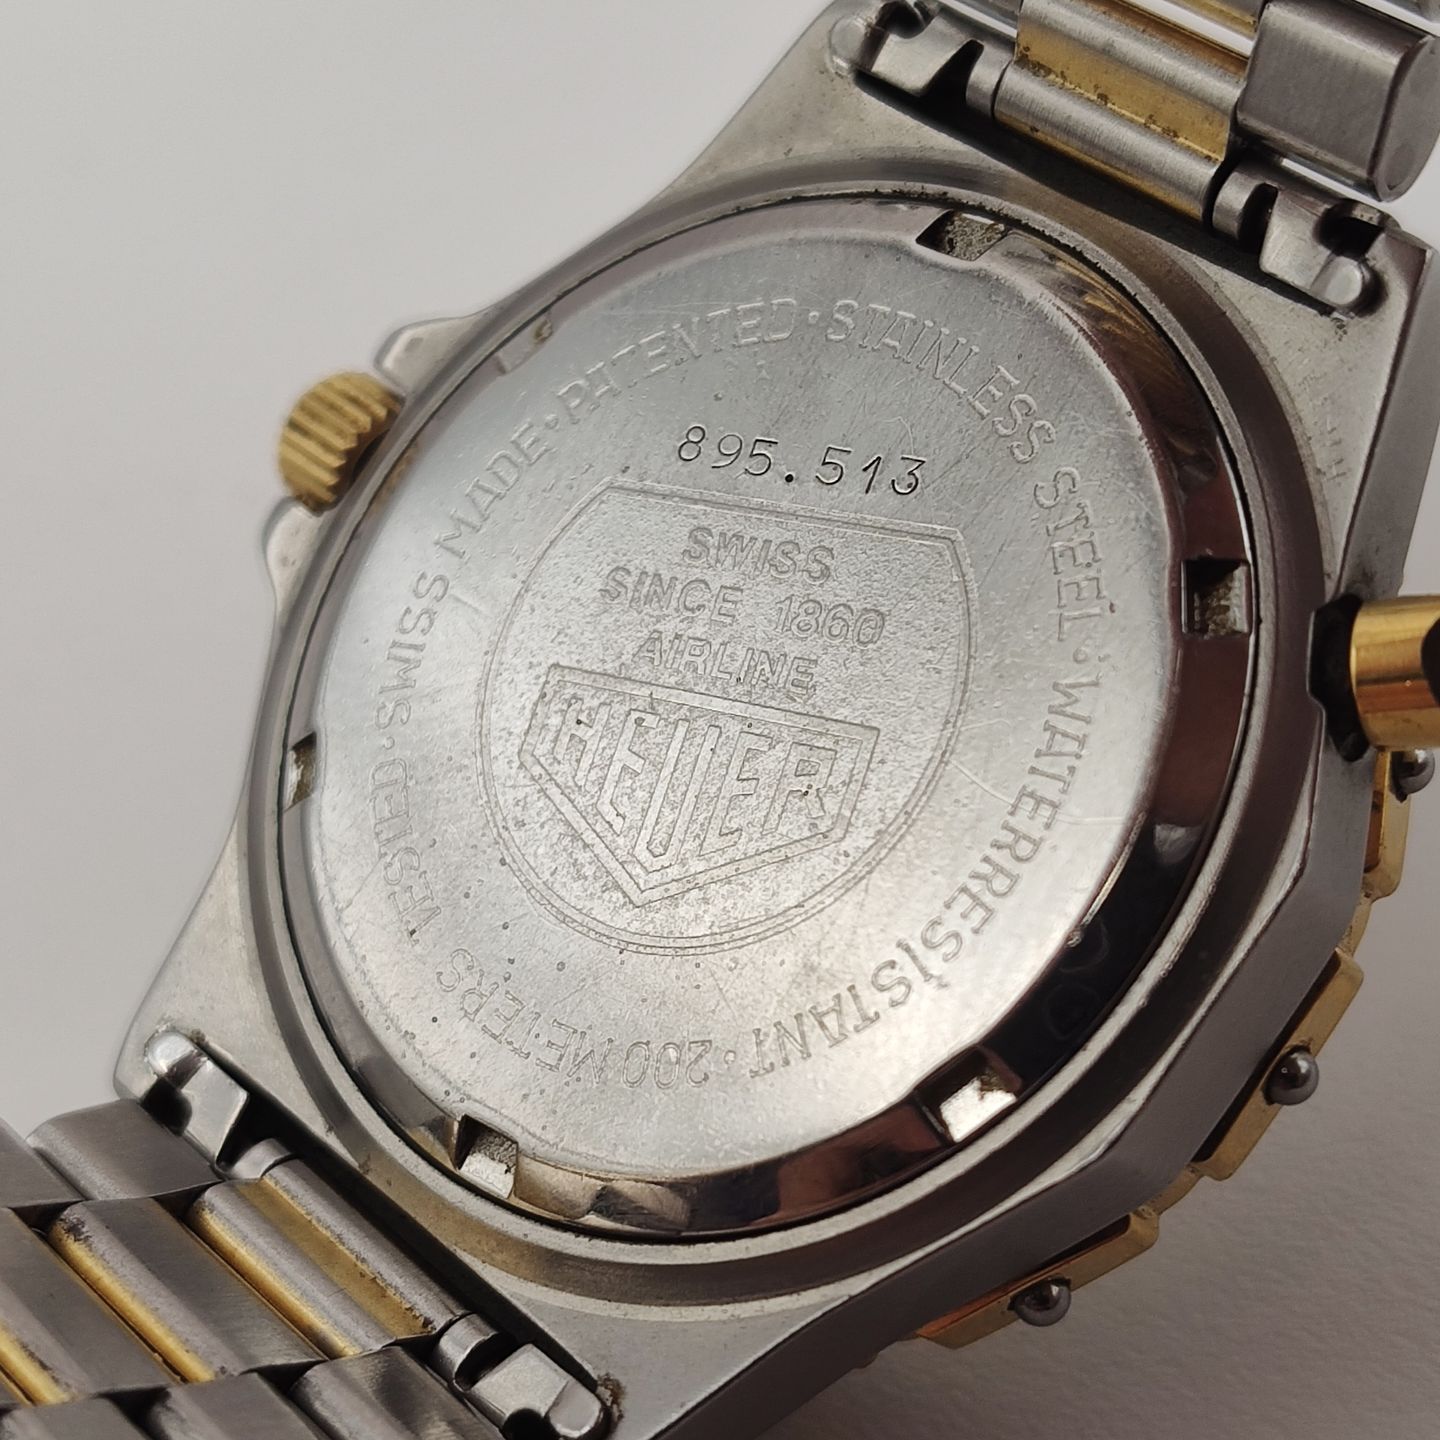 TAG Heuer Vintage TAG Heuer Airline GMT 895.513 Professional 200 Meters Rare Quartz (Unknown (random serial)) - Champagne dial 35 mm Steel case (8/8)